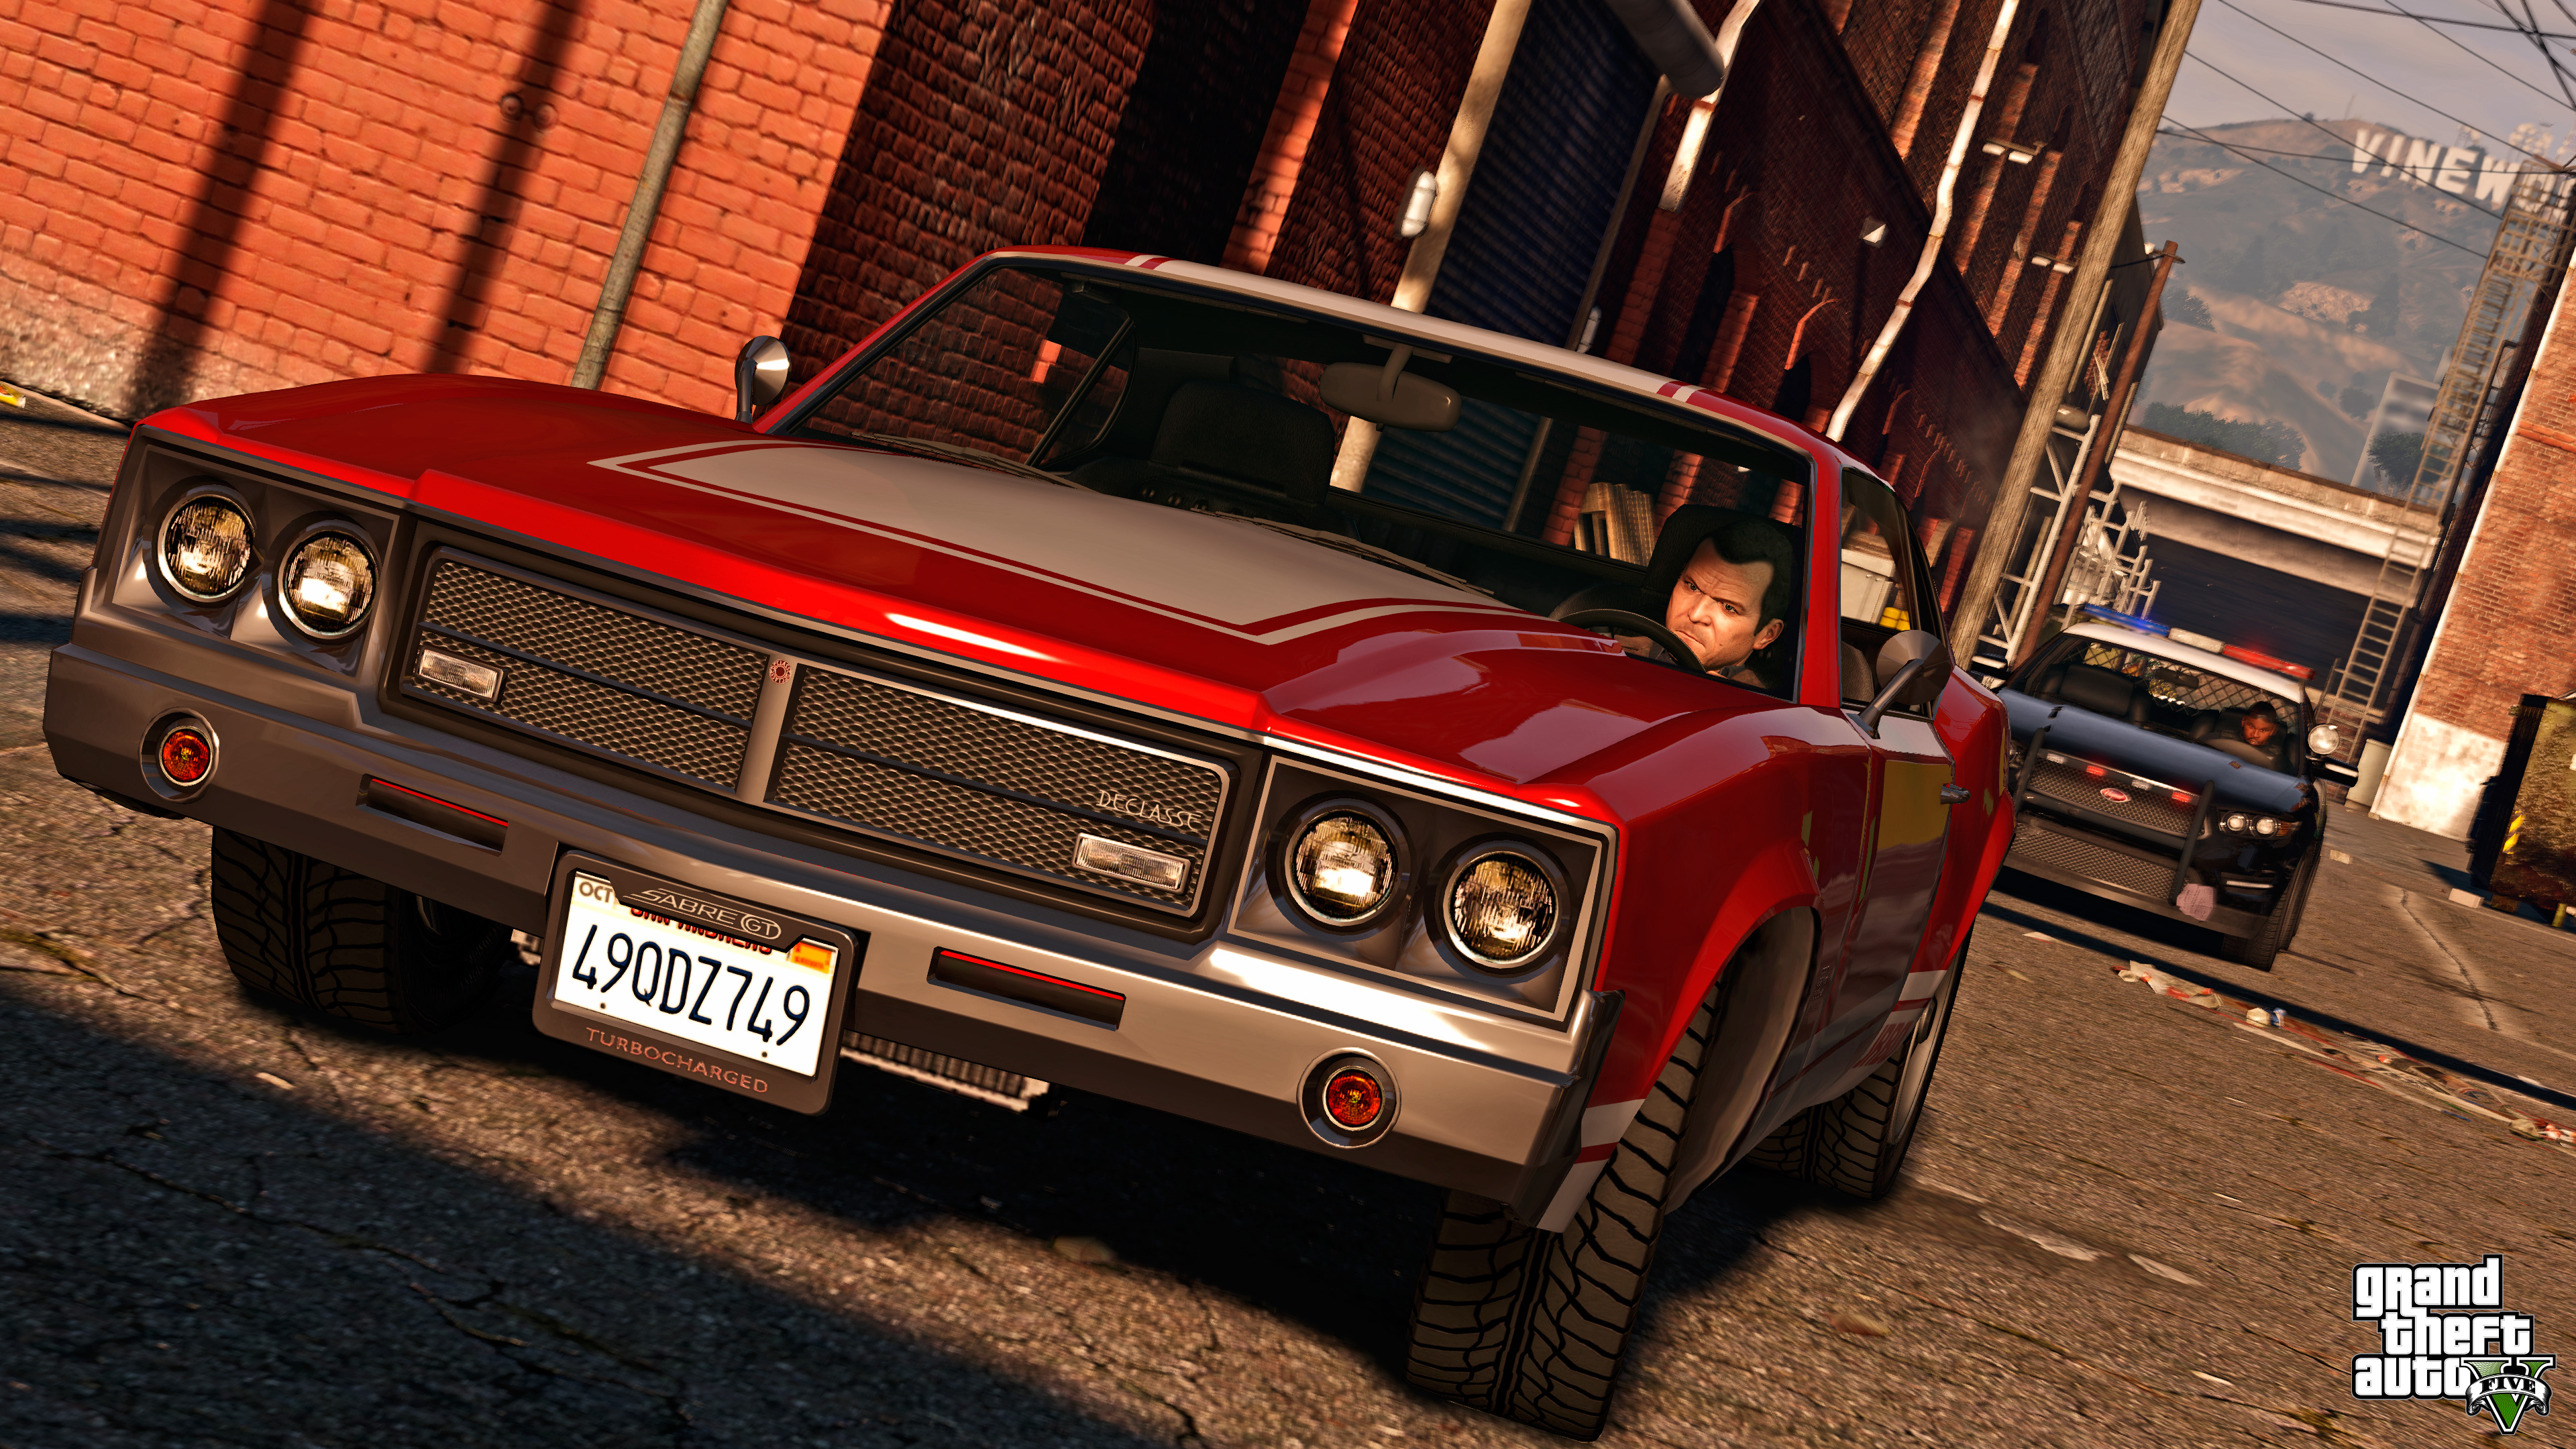 Media asset in full size related to 3dfxzone.it news item entitled as follows: Radeon Software Adrenalin 2019 Edition 19.7.4 - GTA V & Radeon RX 5700 Fix | Image Name: news29824_Grand-Theft-Auto-V-Screenshot_2.jpg